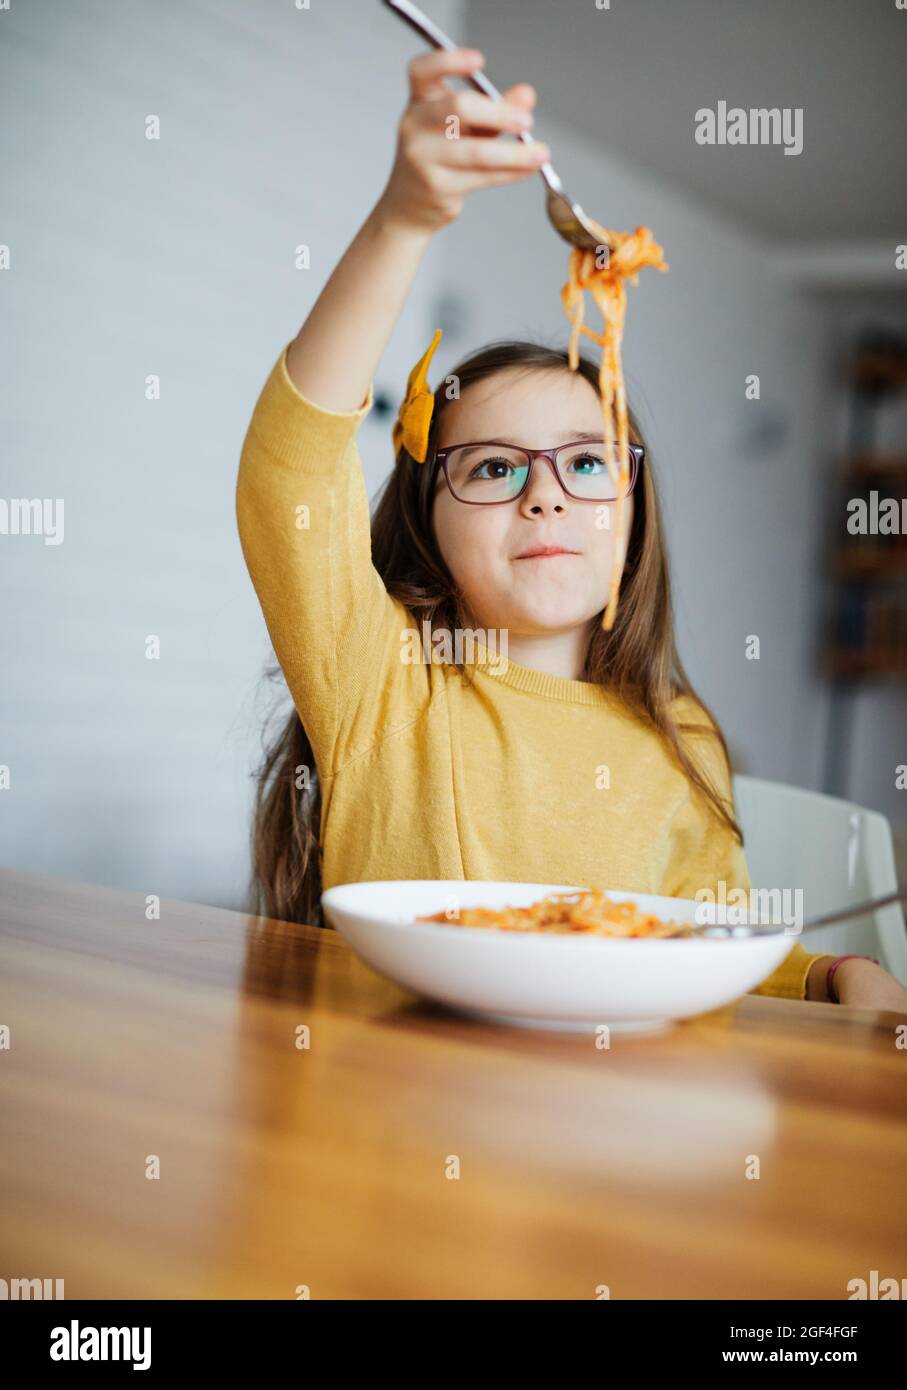 child daughter girl happy spaghetti pasta eating food meal lunch childhood Stock Photo